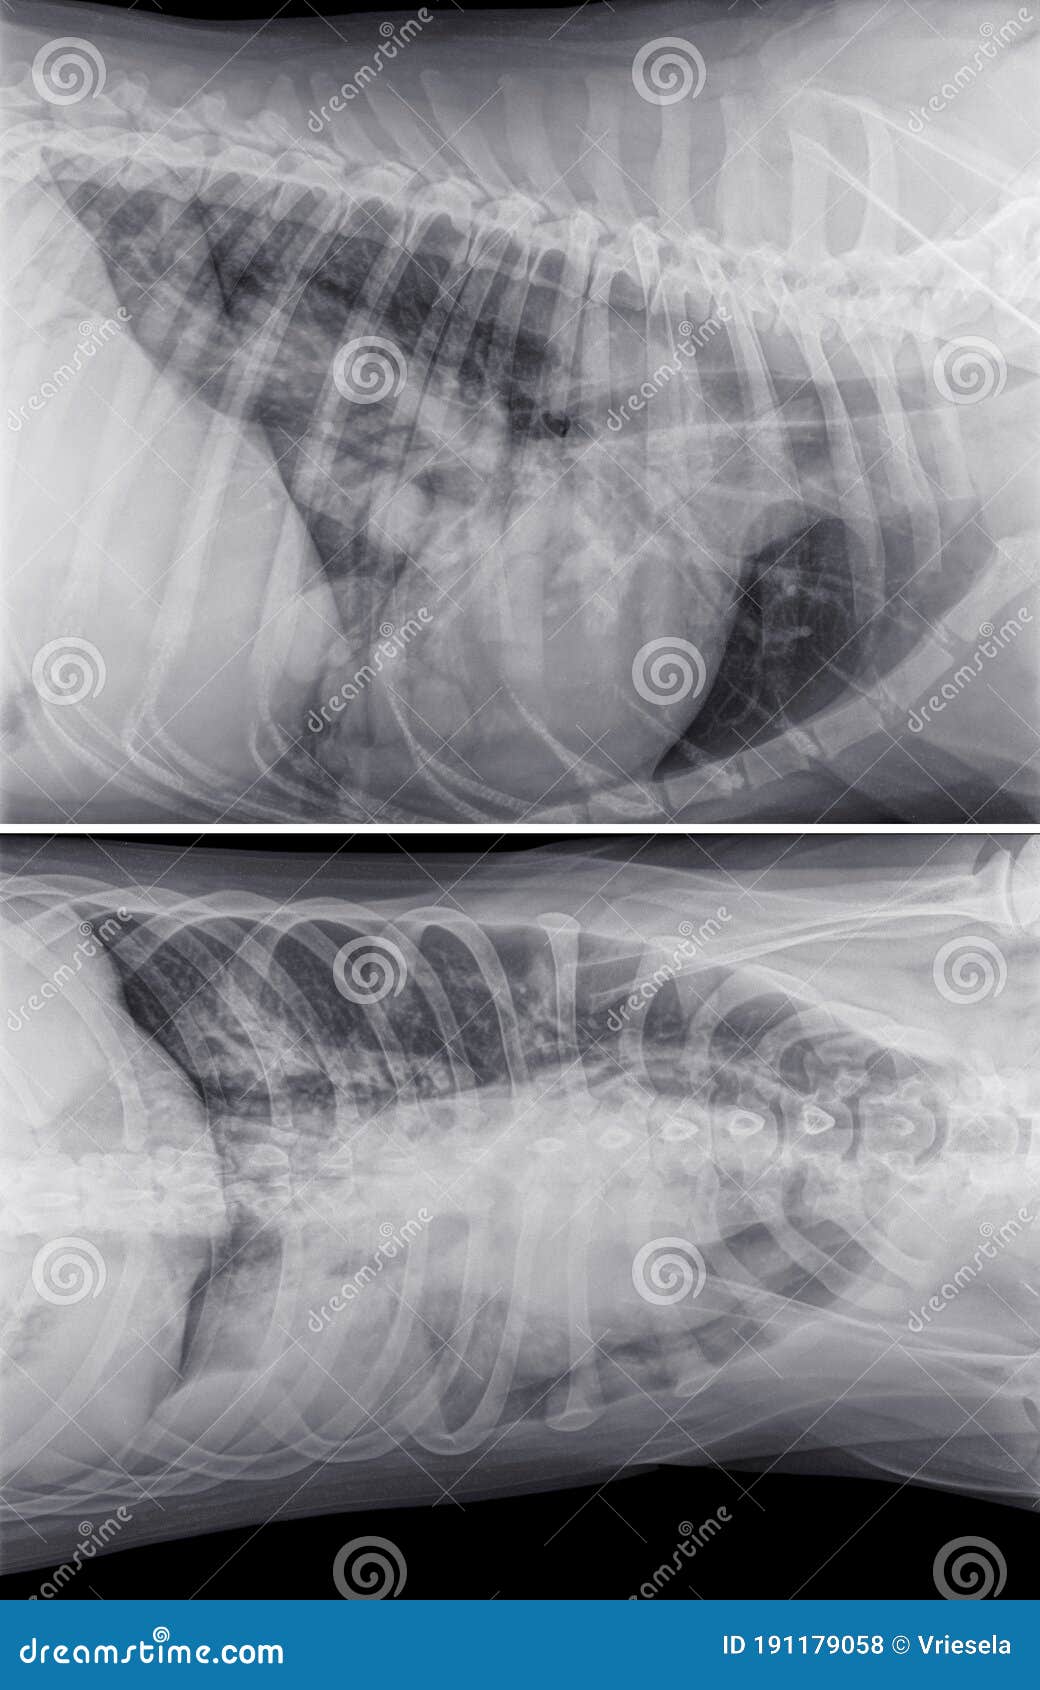 how much is a chest xray for a dog